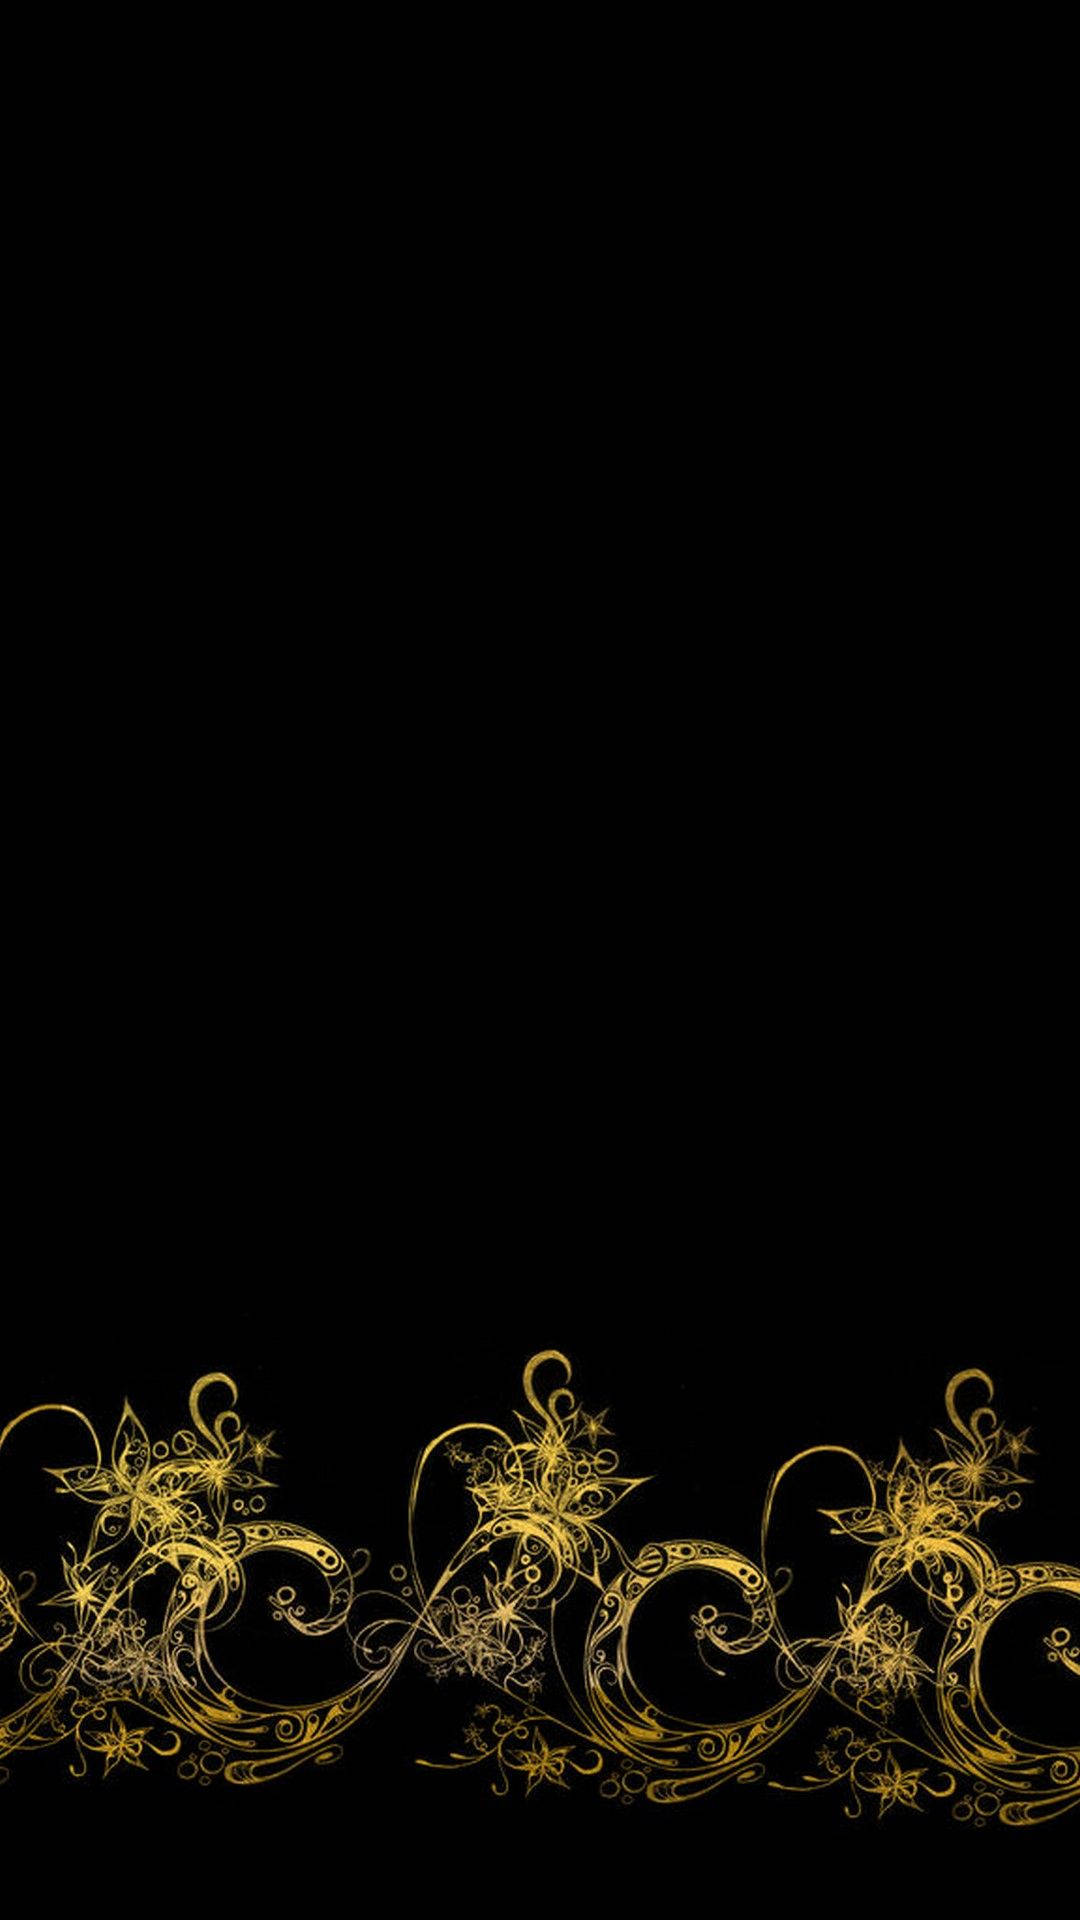 Black Android With Ornate Gold Design Background